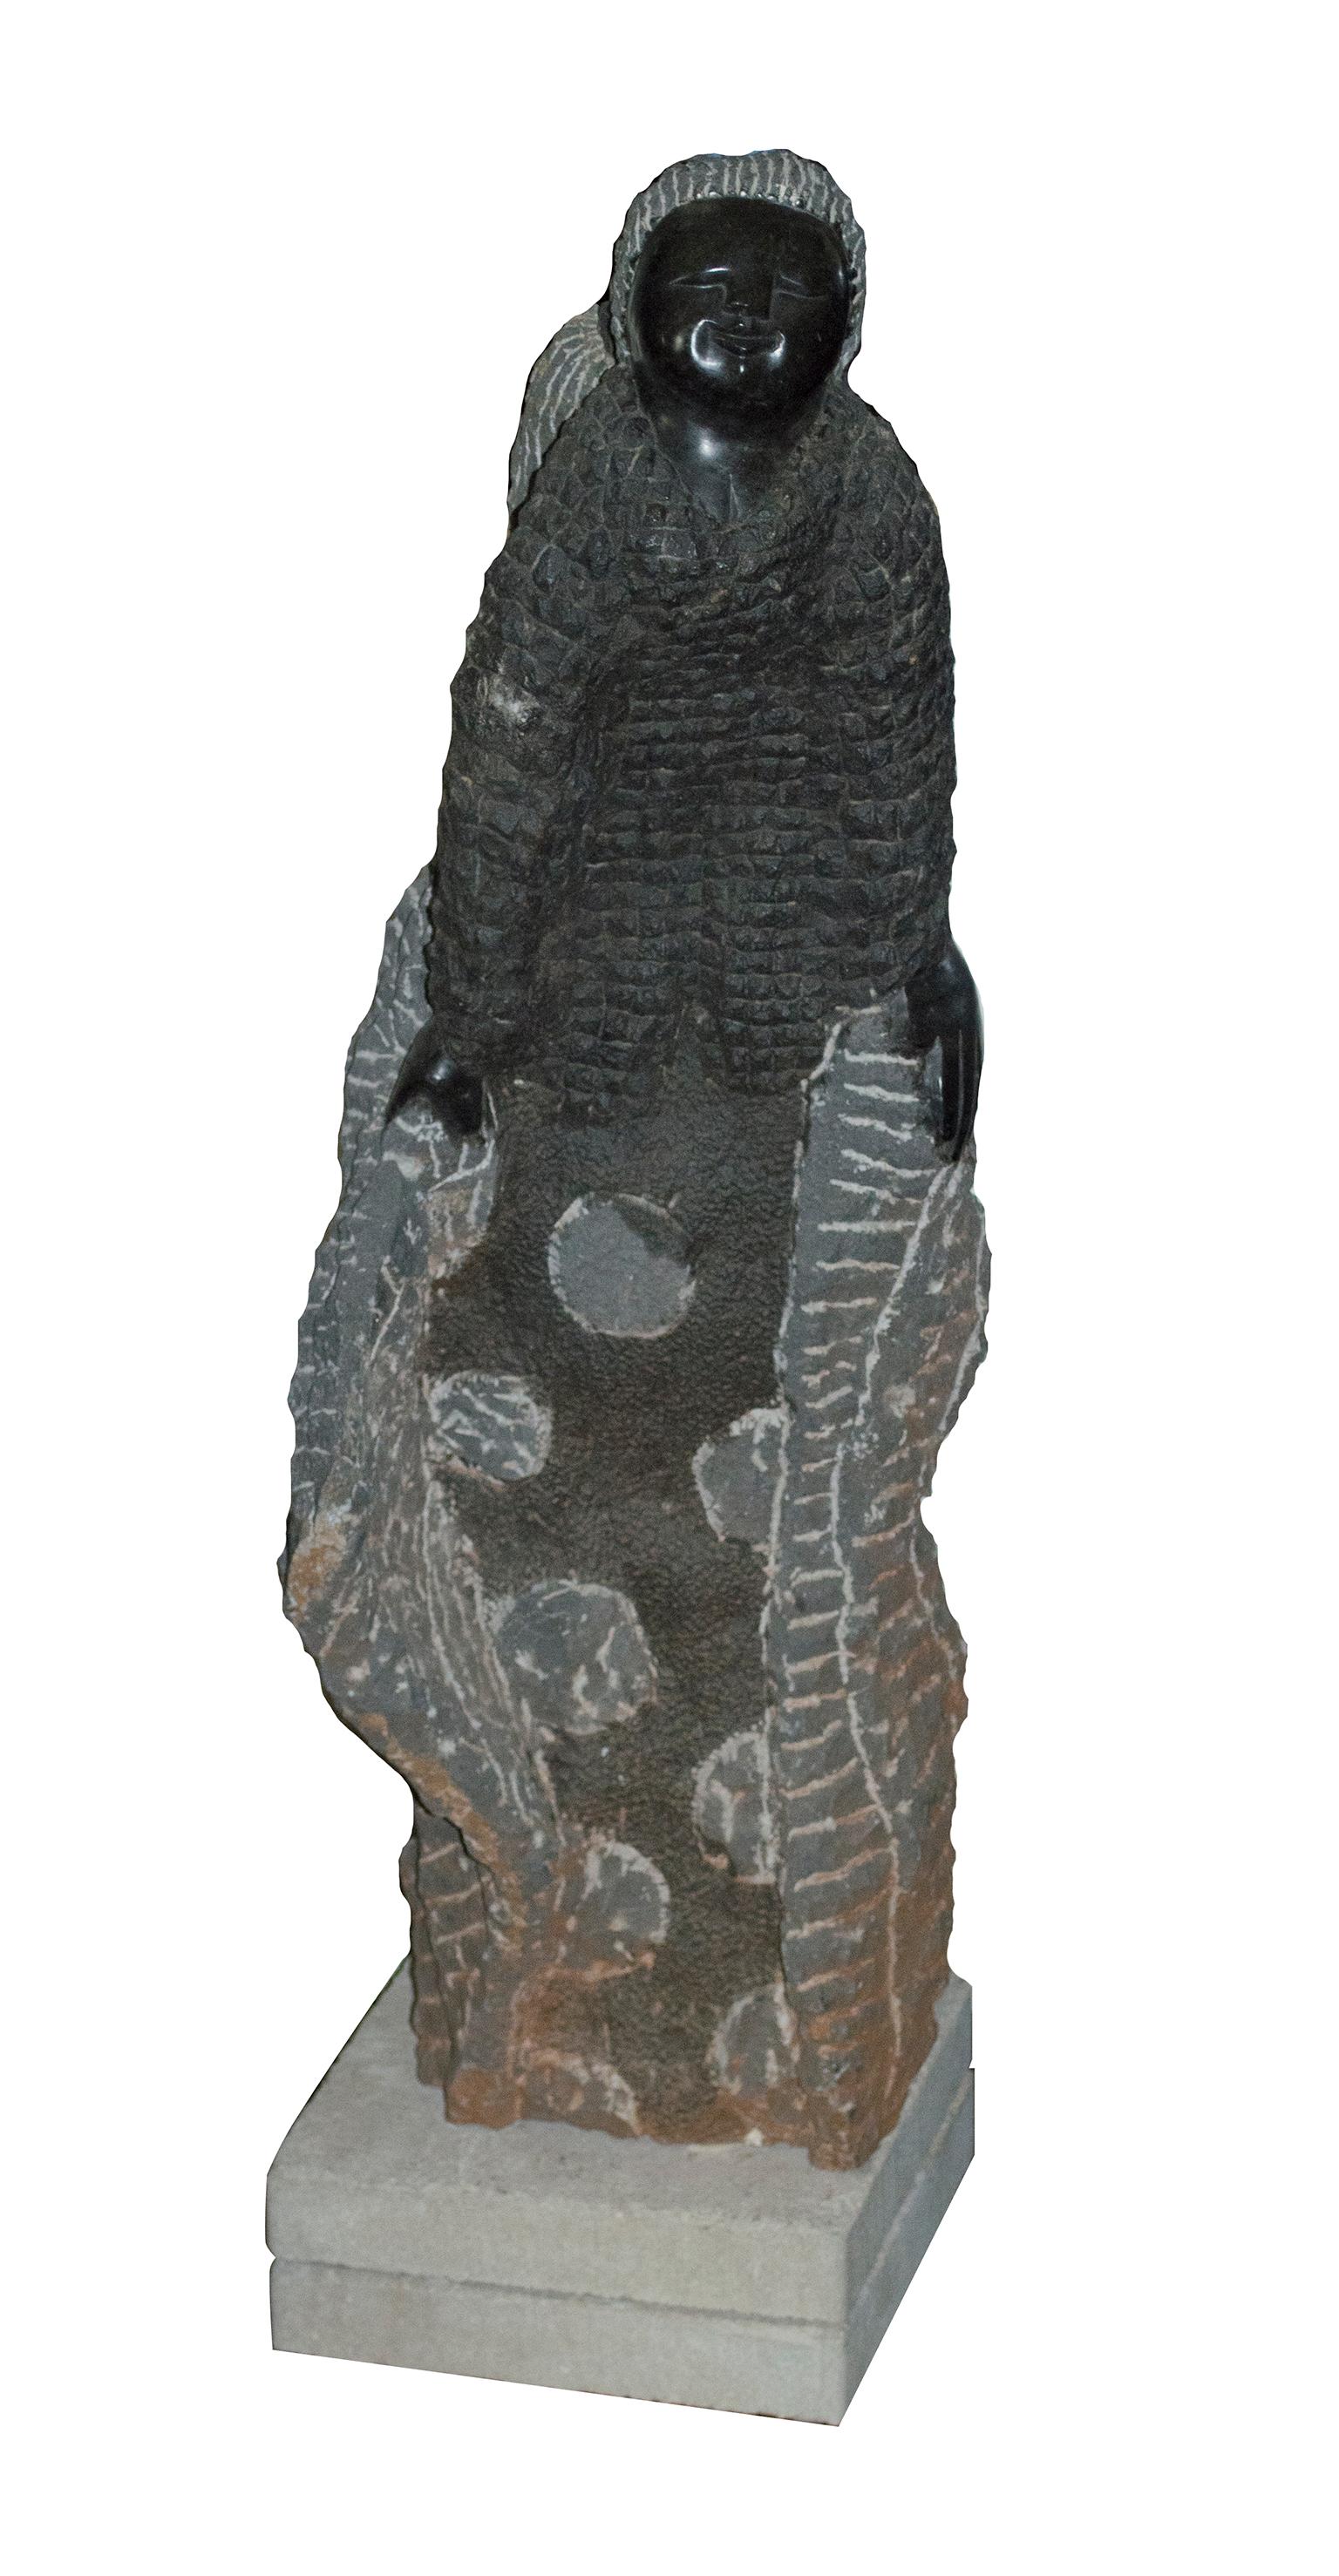 "Celebrations (C-56)" is an original black serpentine stone sculpture by Colleen Madamombe. The artist signed the piece, and it weighs 228 pounds. This piece features a woman with a large, textured dress. 

Sculpture Size: 39" x 14" x 16"

Artist